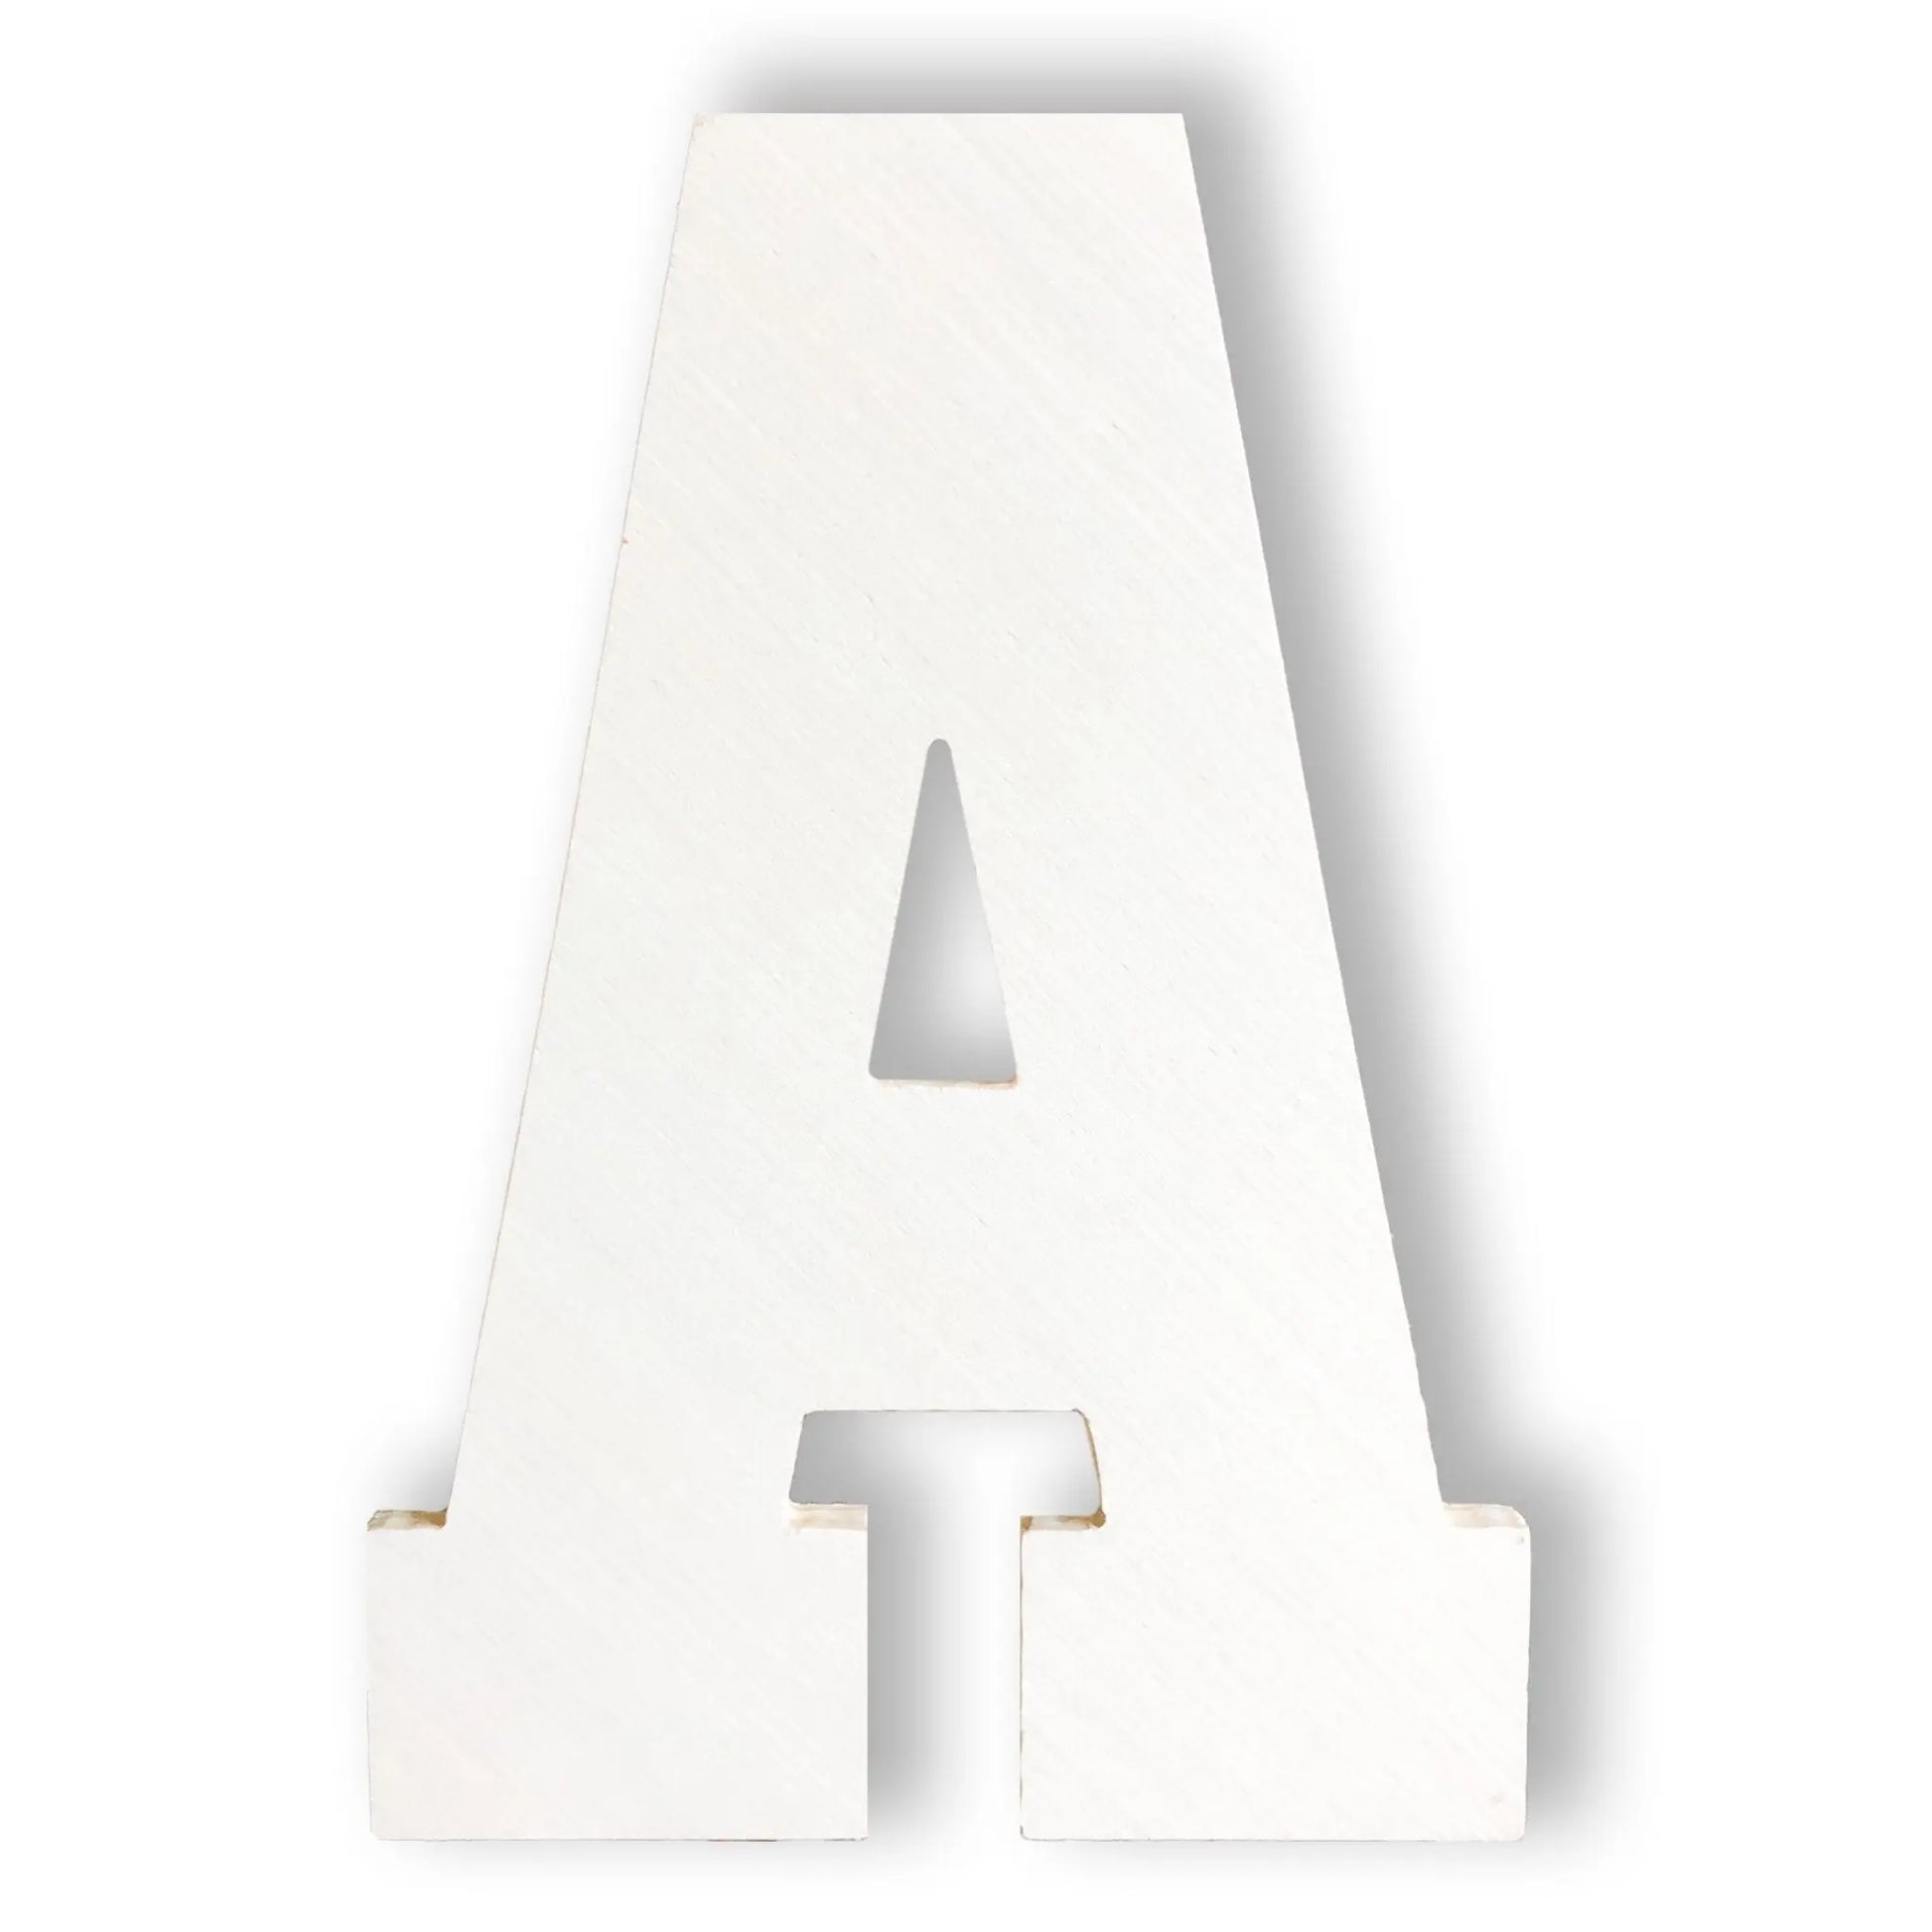 Hanging Wall Letters, Cheap Wooden Letters, Craft Letters, DIY Letter